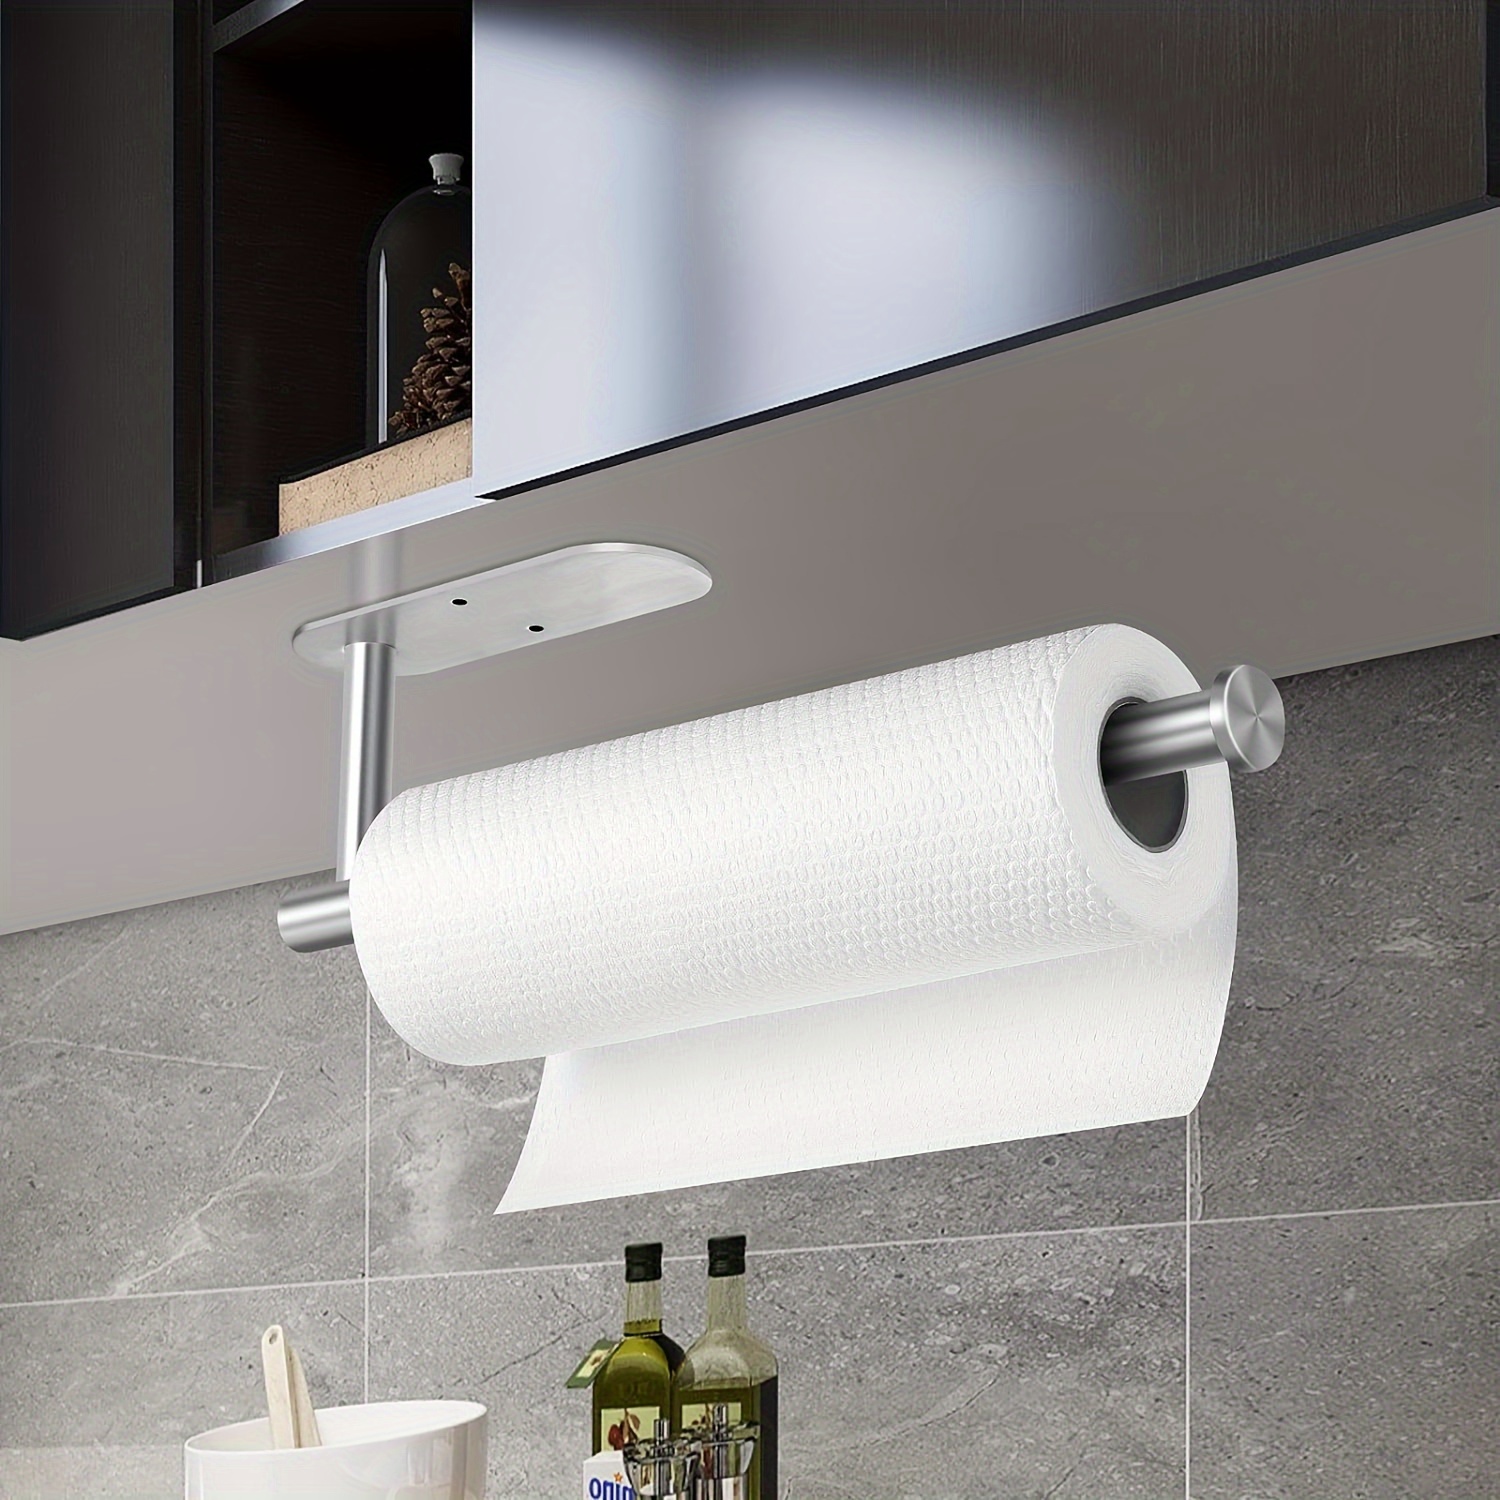 

1pc Wall-mounted Punching-free Toilet Paper Holder Under Cabinet, Self-adhesive Toilet Roll Holder, Bathroom Paper Holder, Home Kitchen And Bathroom Accessories